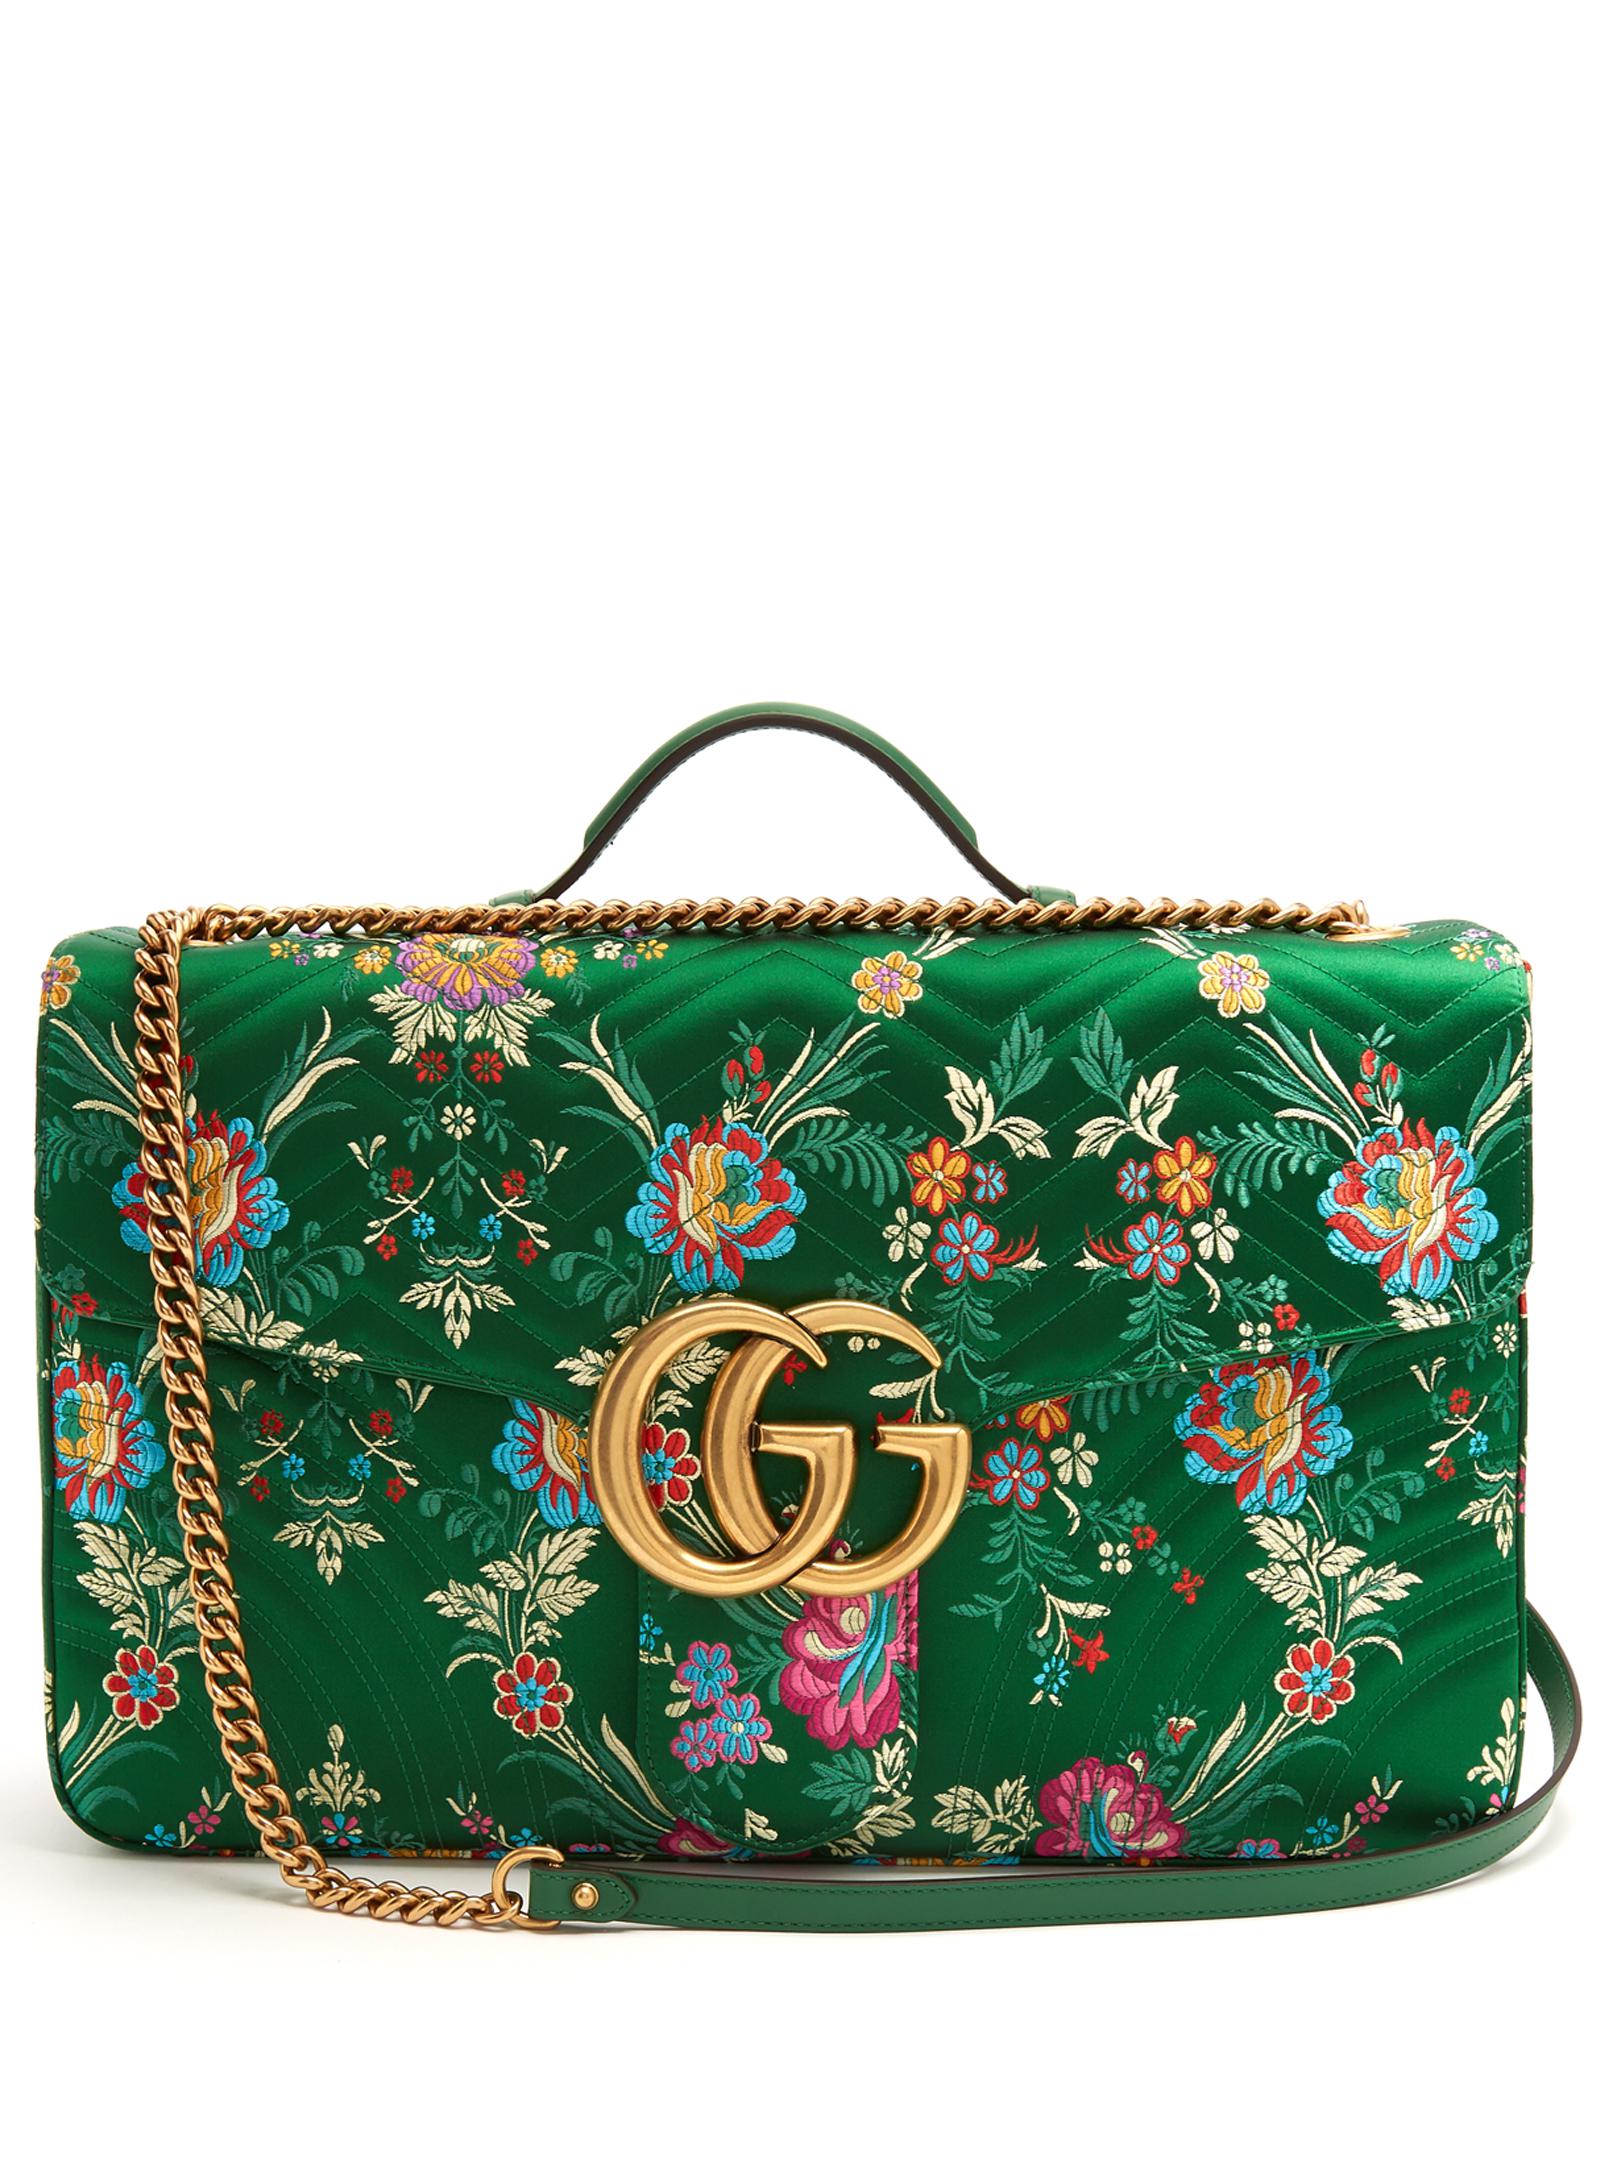 Gucci Satin Gg Marmont Maxi Floral-jacquard Shoulder Bag in Green - Lyst